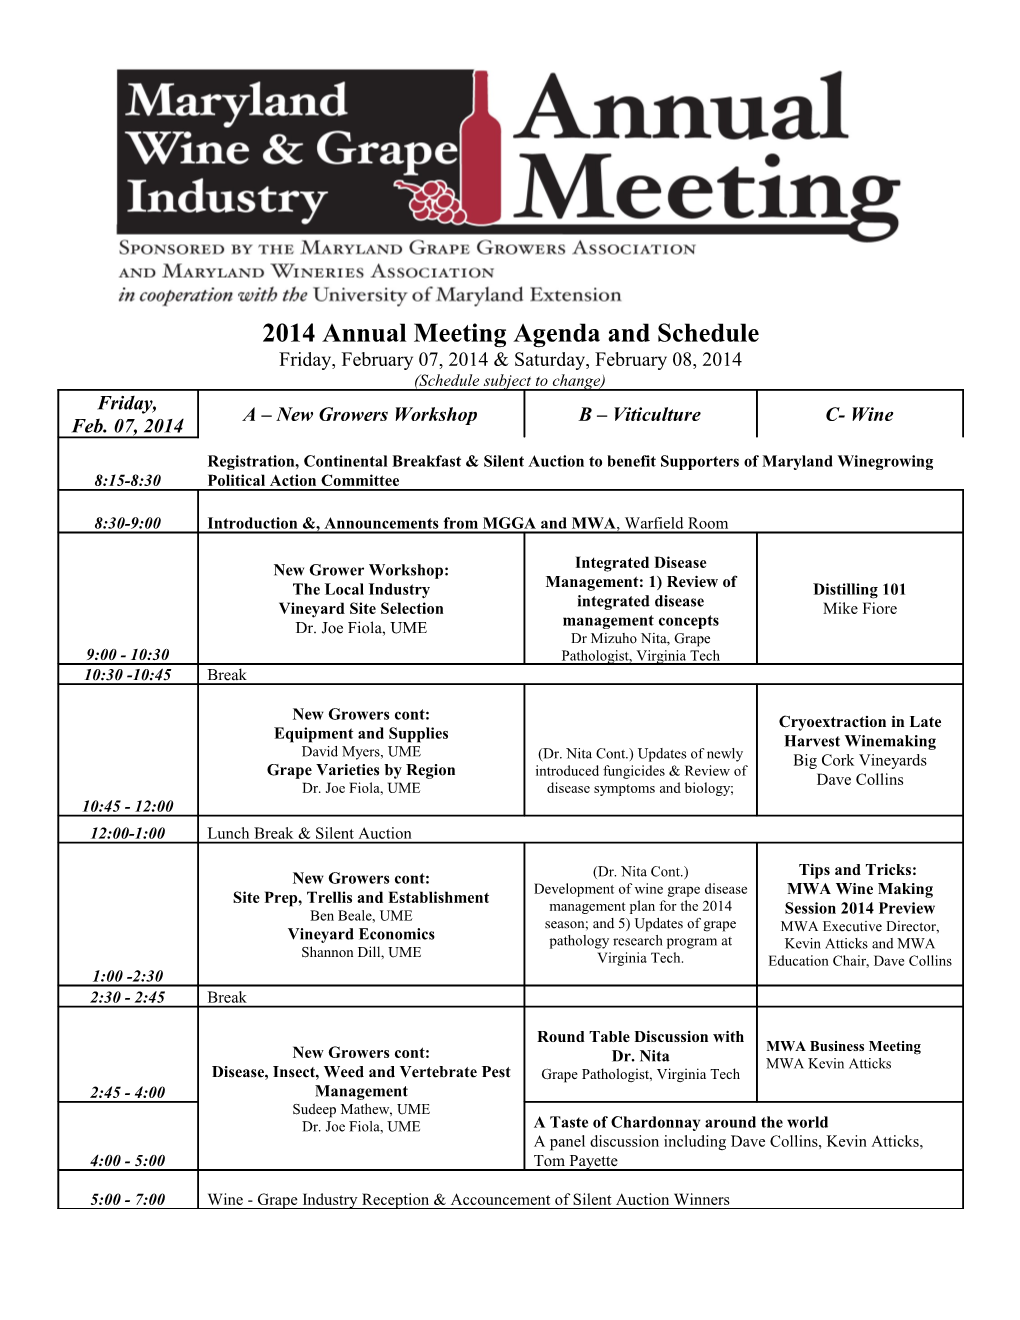 2014 Annual Meeting Agenda and Schedule